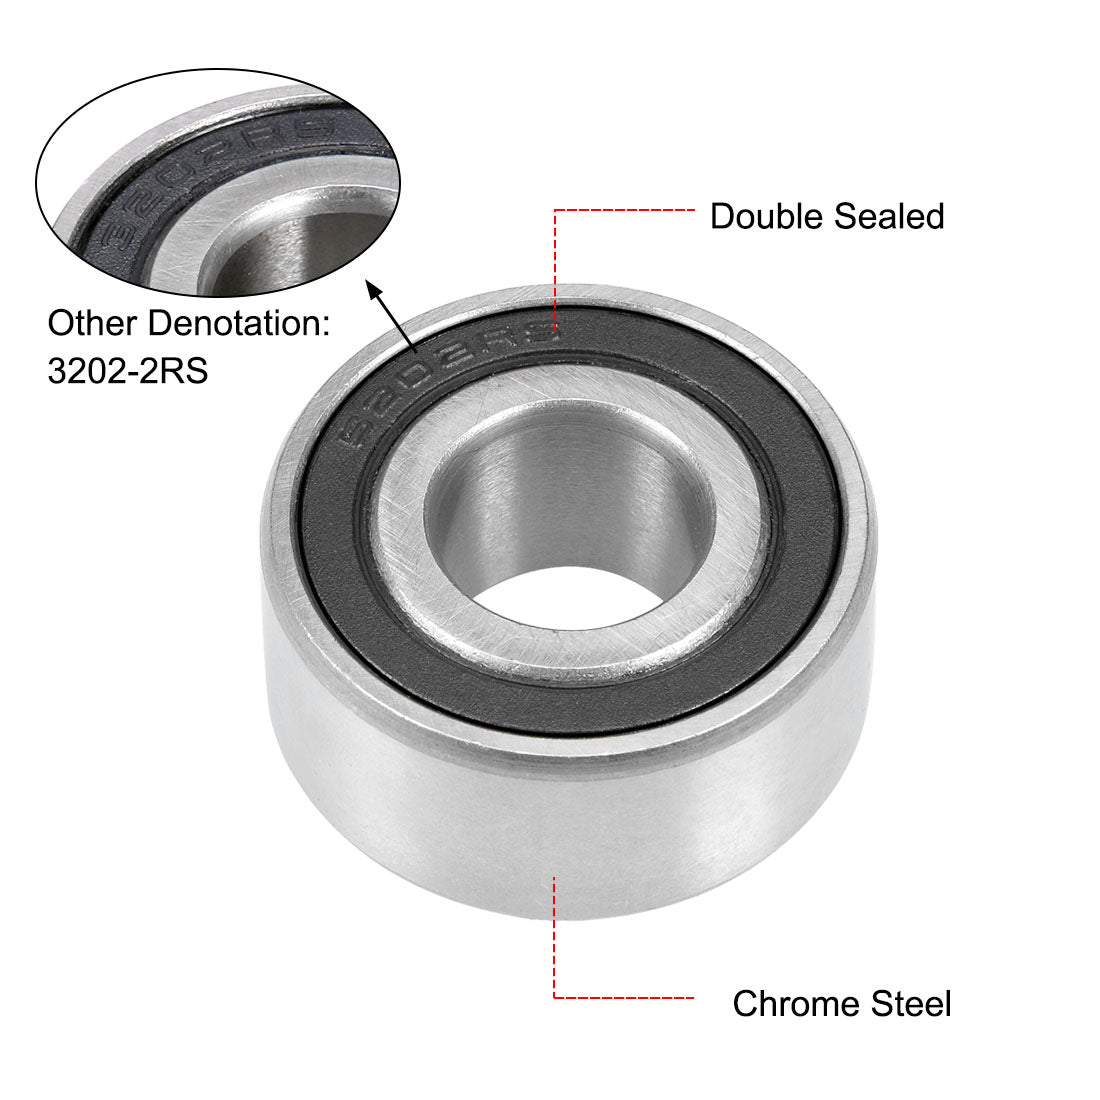 uxcell Uxcell 5202-2RS 3202-2RS Angular Contact Ball Bearing 15x35x15.9mm Sealed Bearings 2pcs